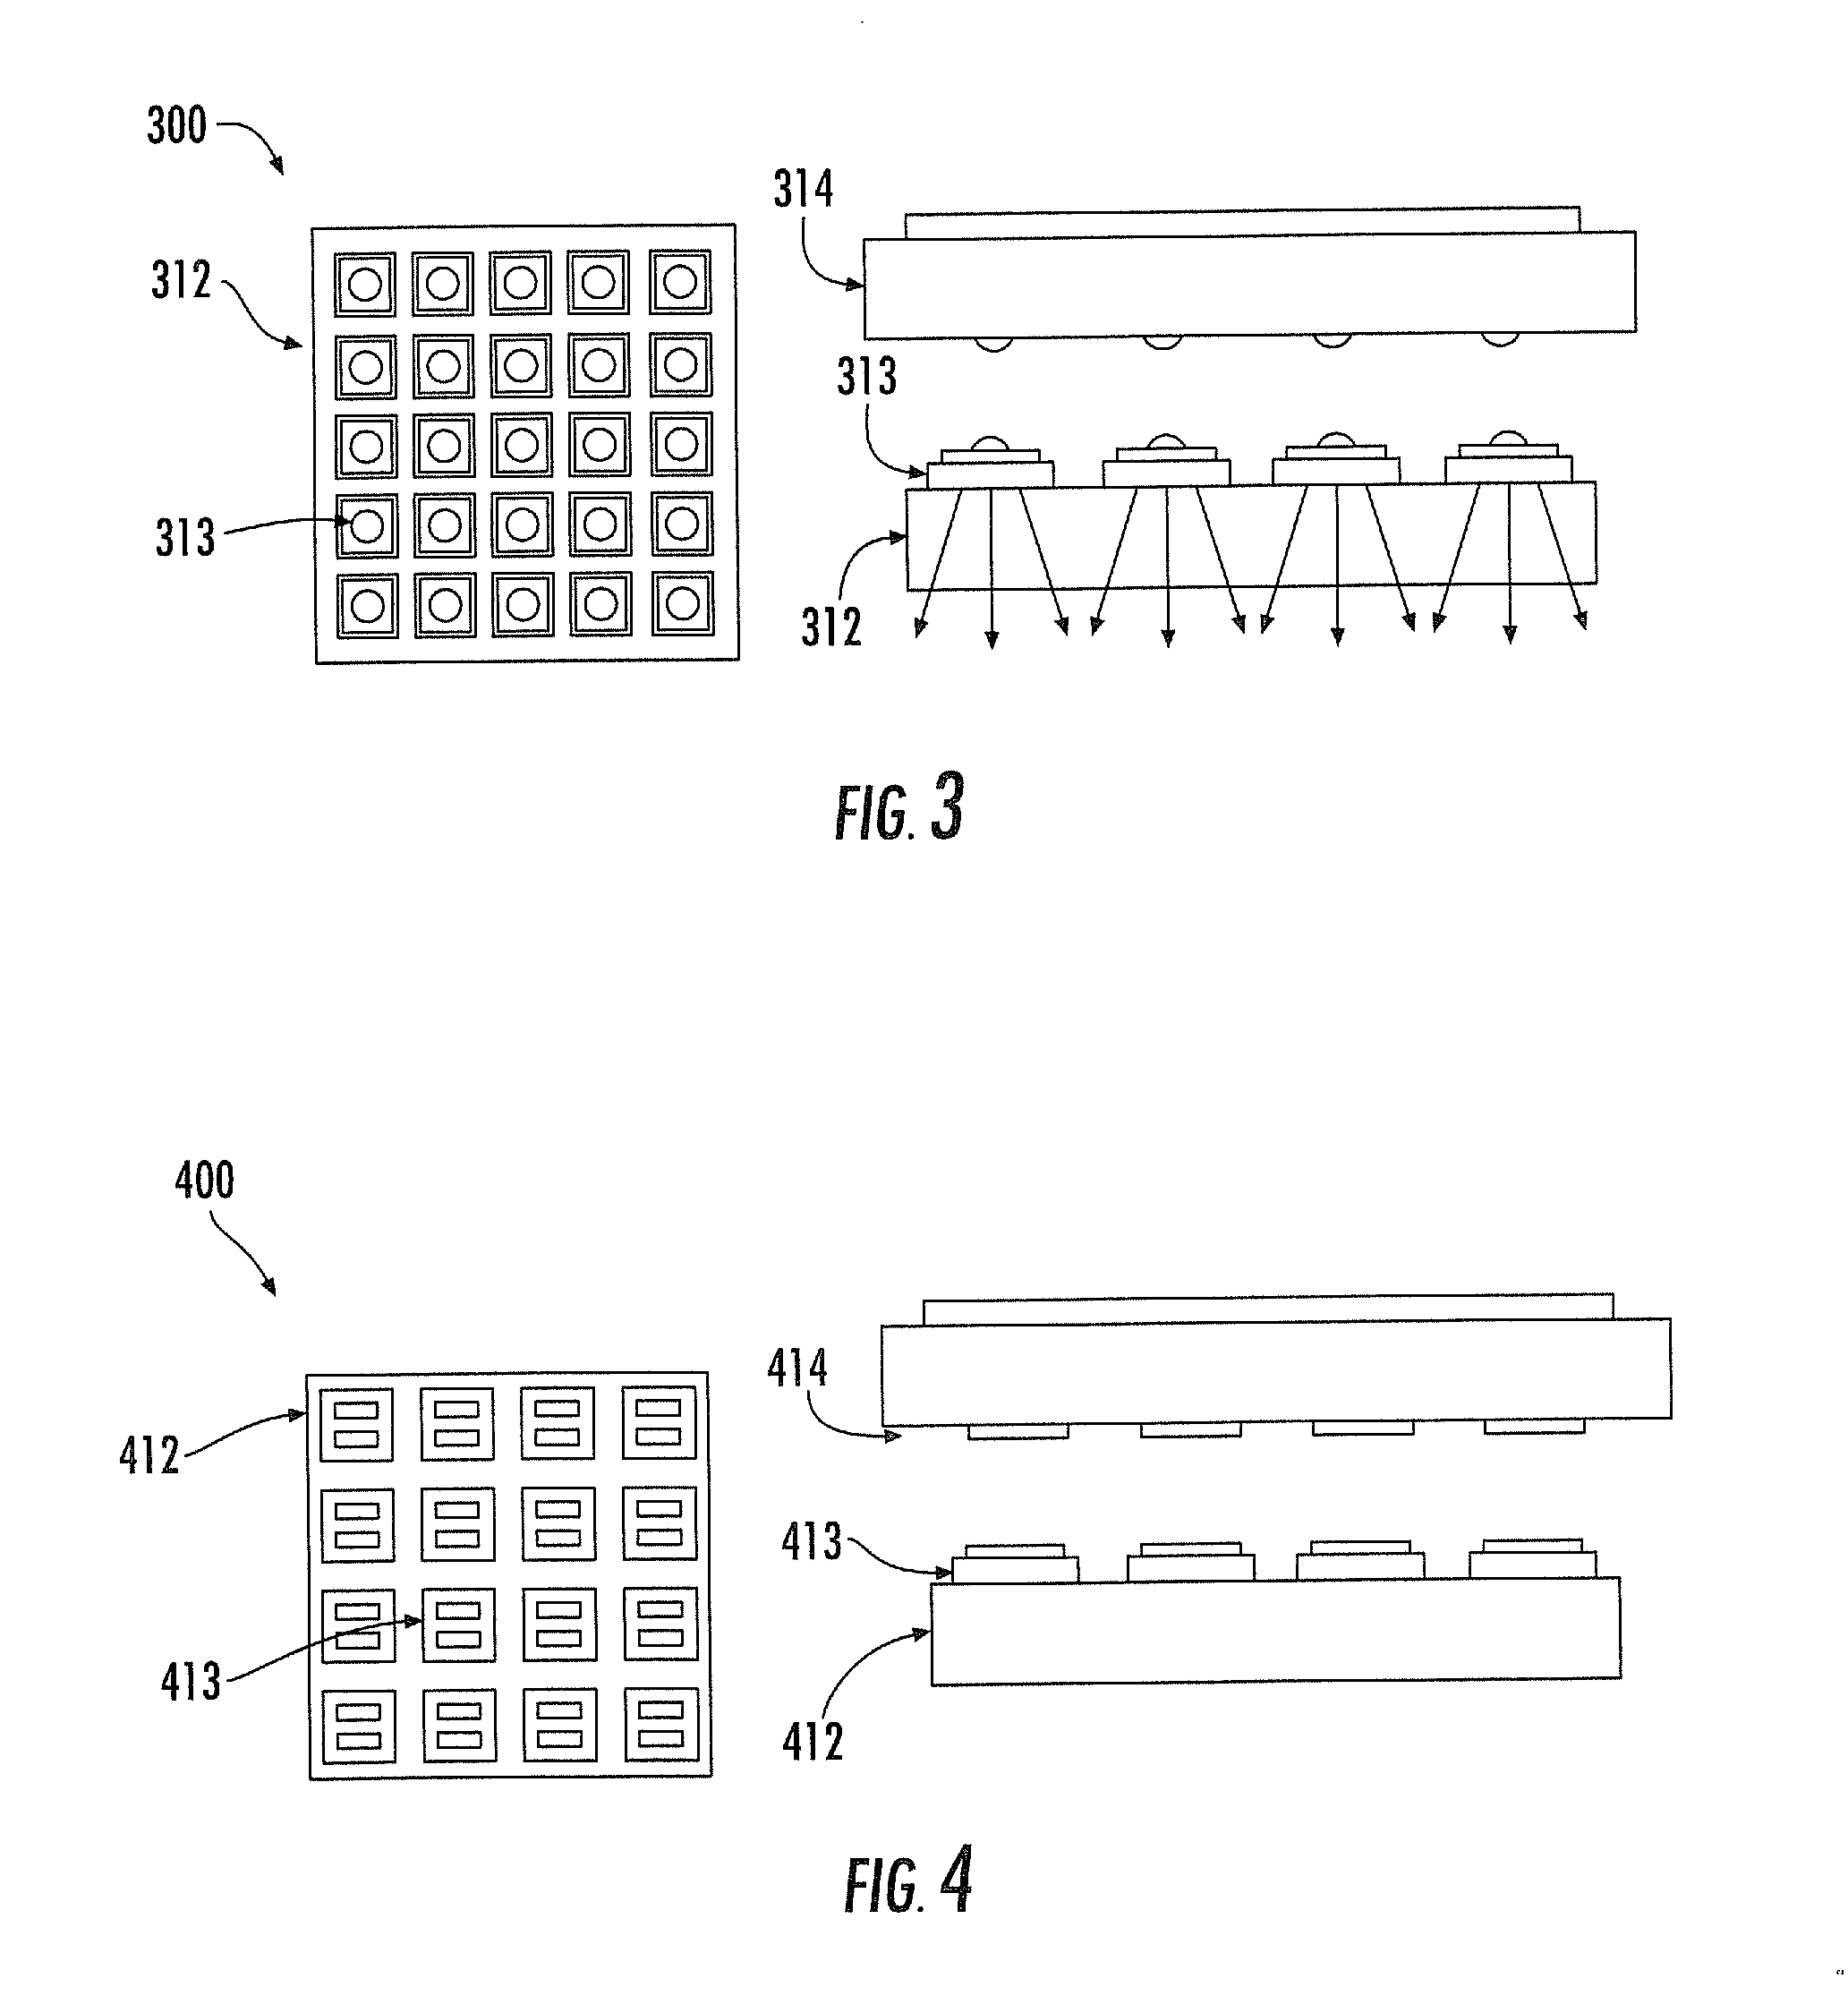 Noninvasive physiological analysis using excitation-sensor modules and related devices and methods